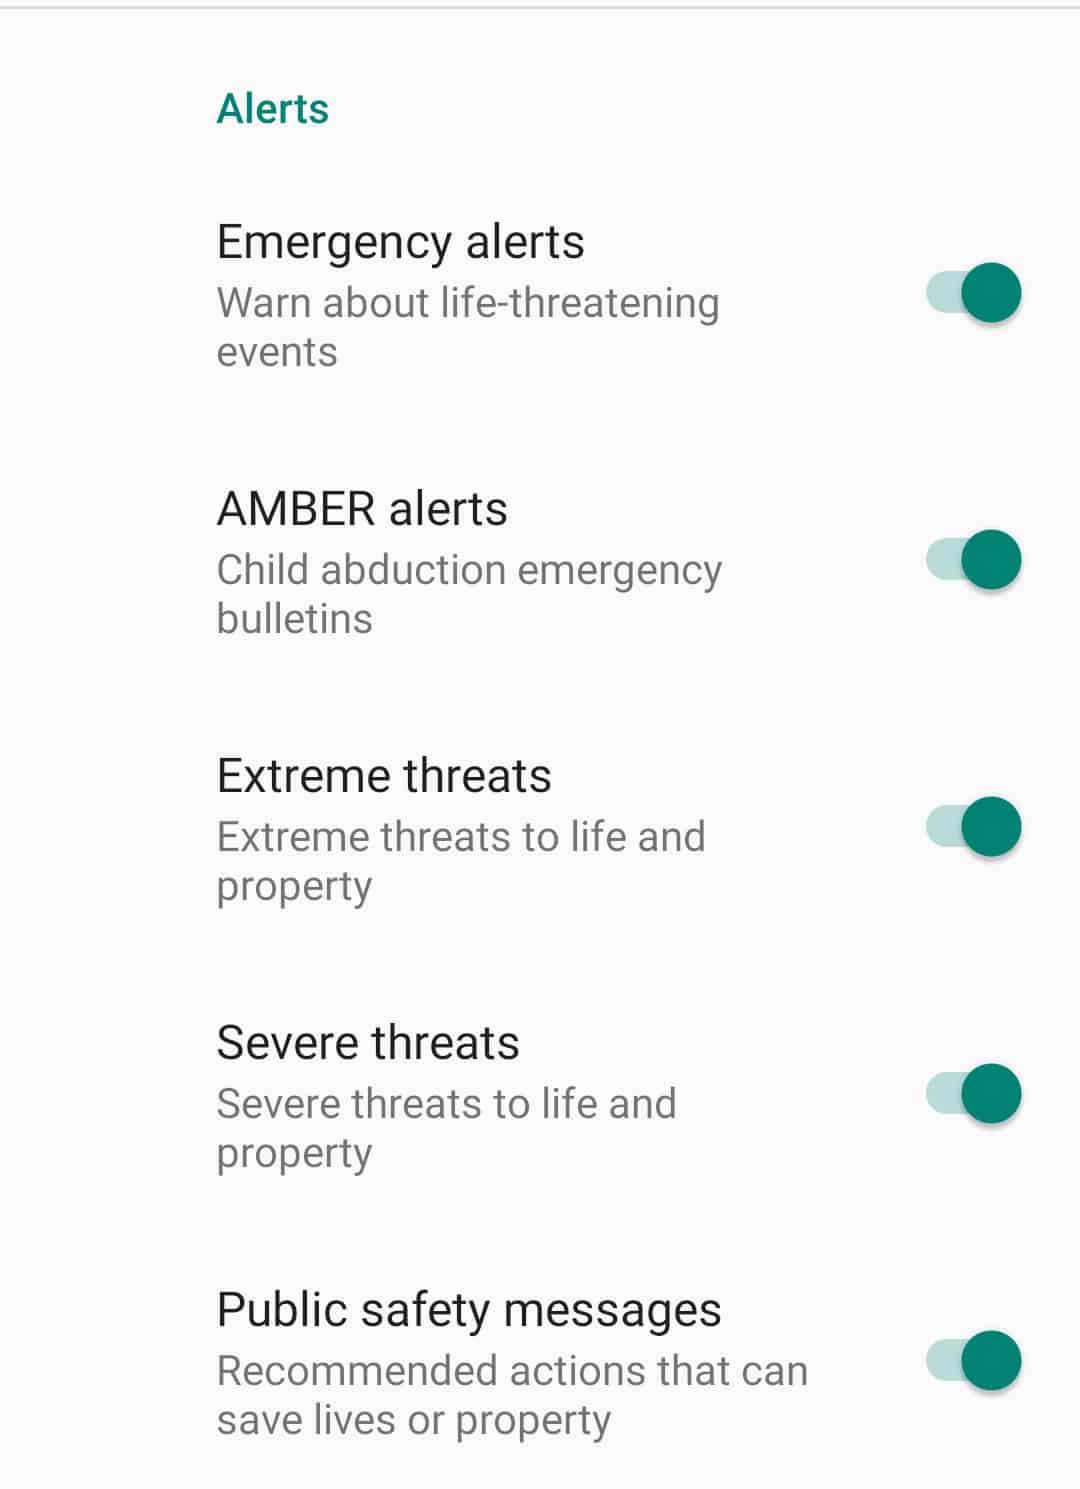 How to turn on emergency alerts on your Android smartphone